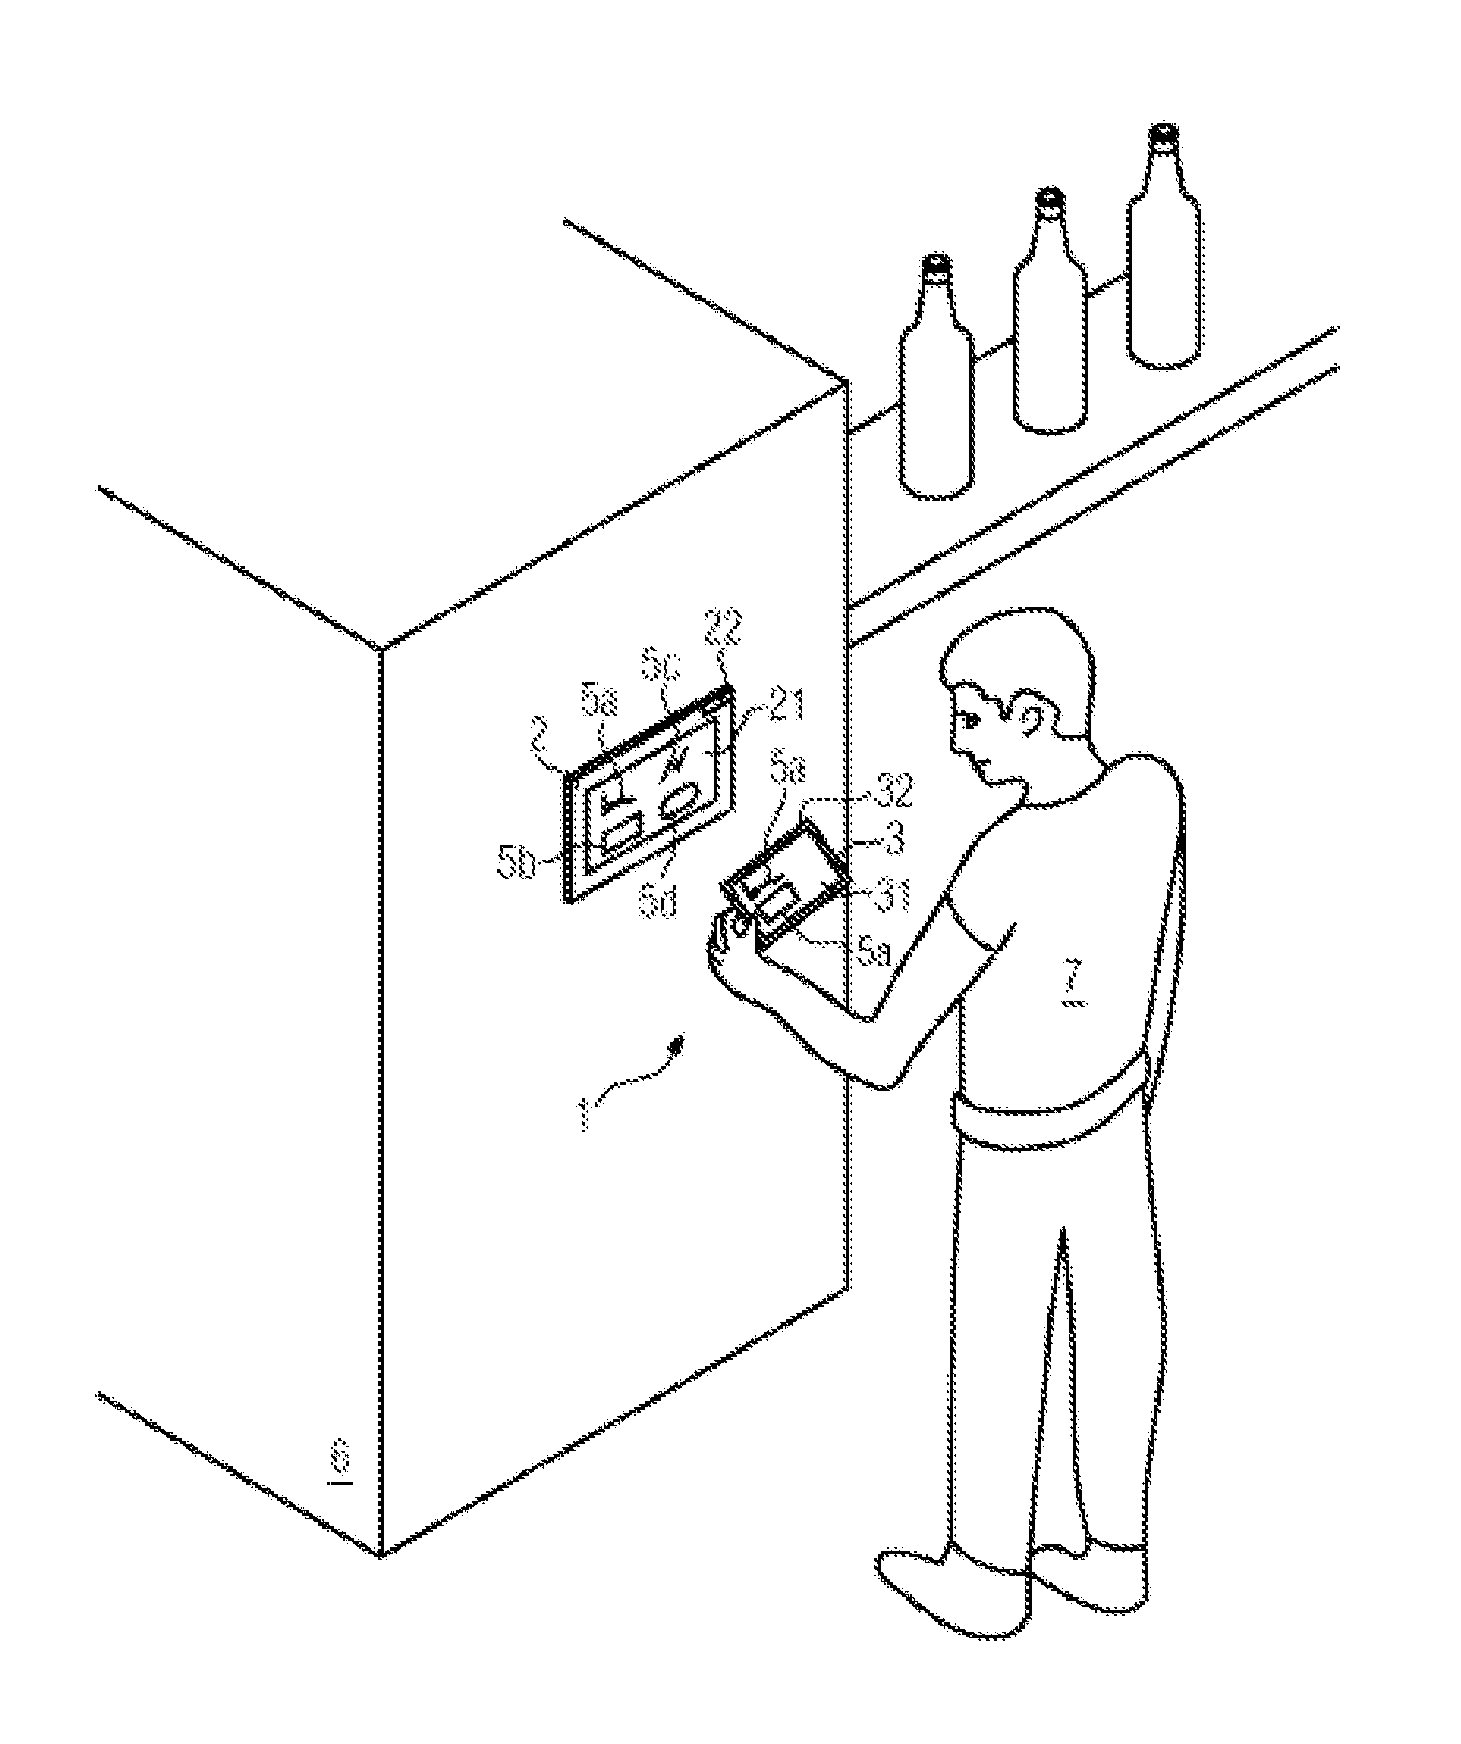 Operating system for a container handling machine, an operating device and a separate additional screen